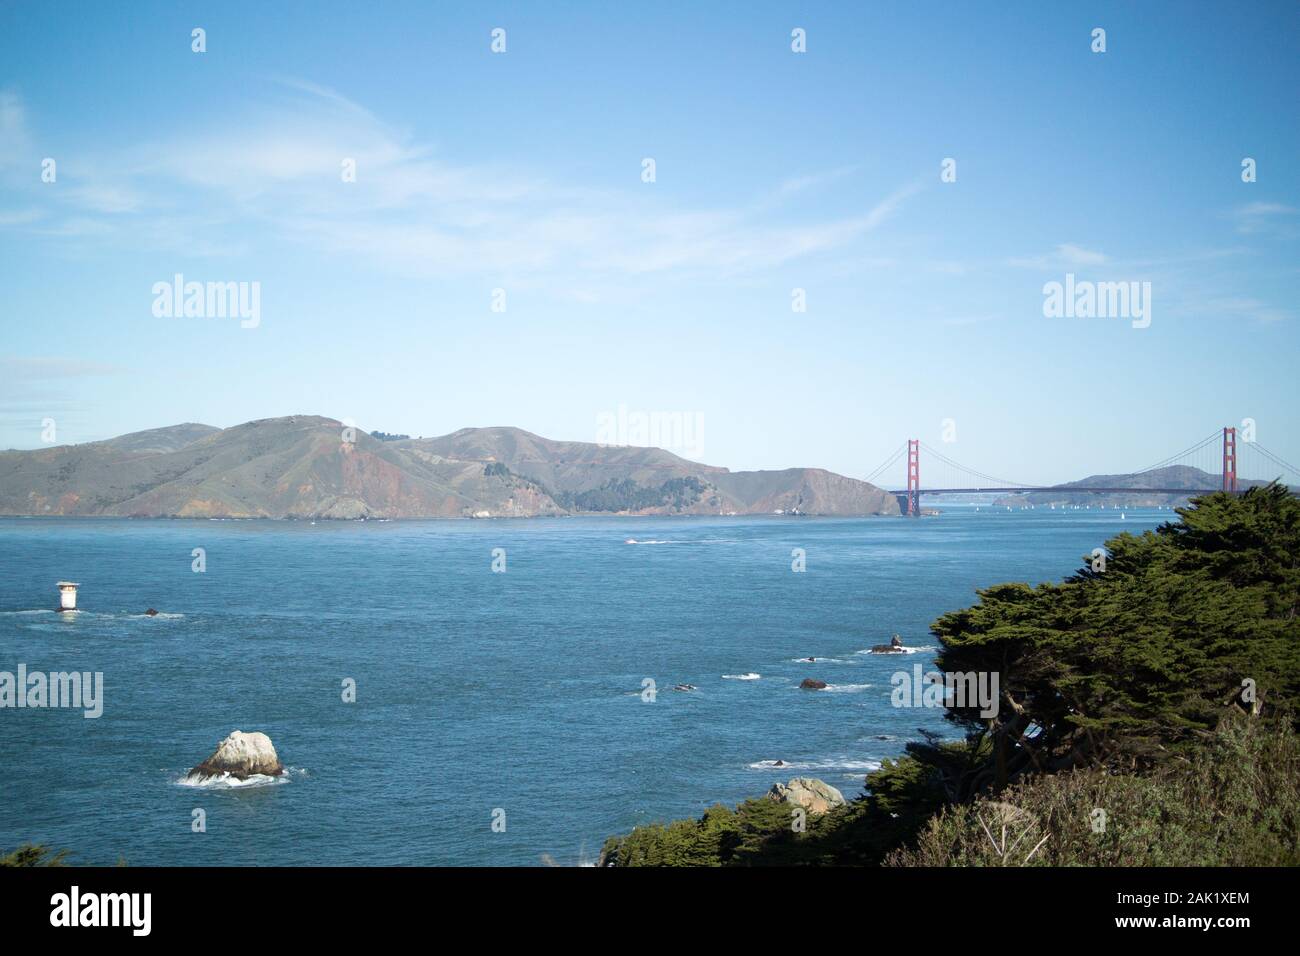 View of San Francisco Bay and the Golden Gate Bridge, taken from the Golden Gate Recreation Area, west of the bridge. Stock Photo